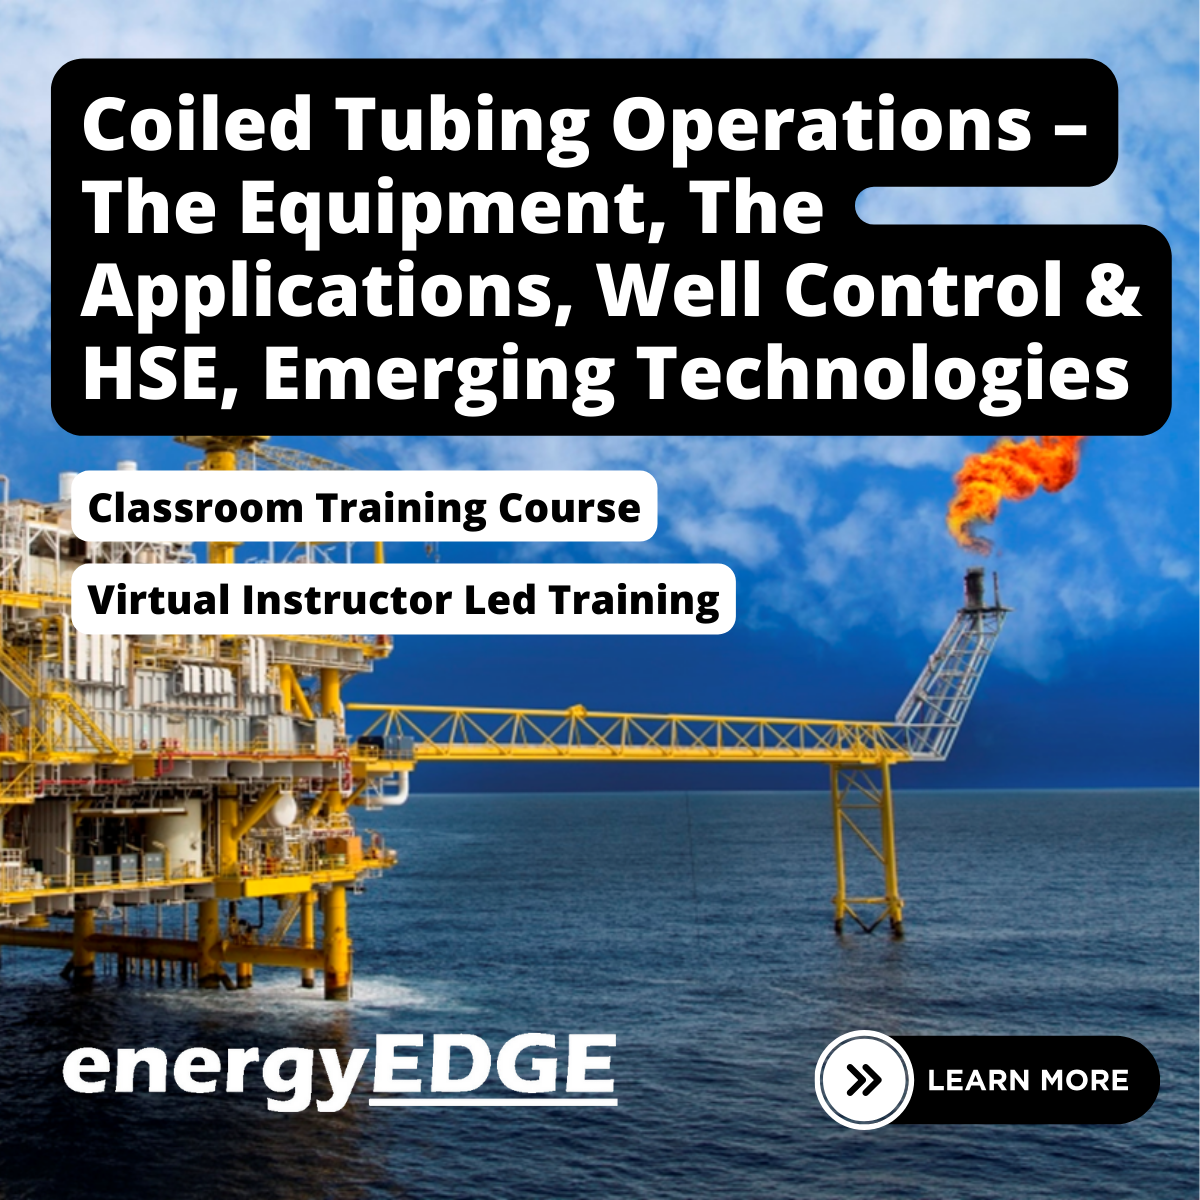 Coiled Tubing Operations – Equipment, Applications, Well Control, Safety & Emerging Technologies